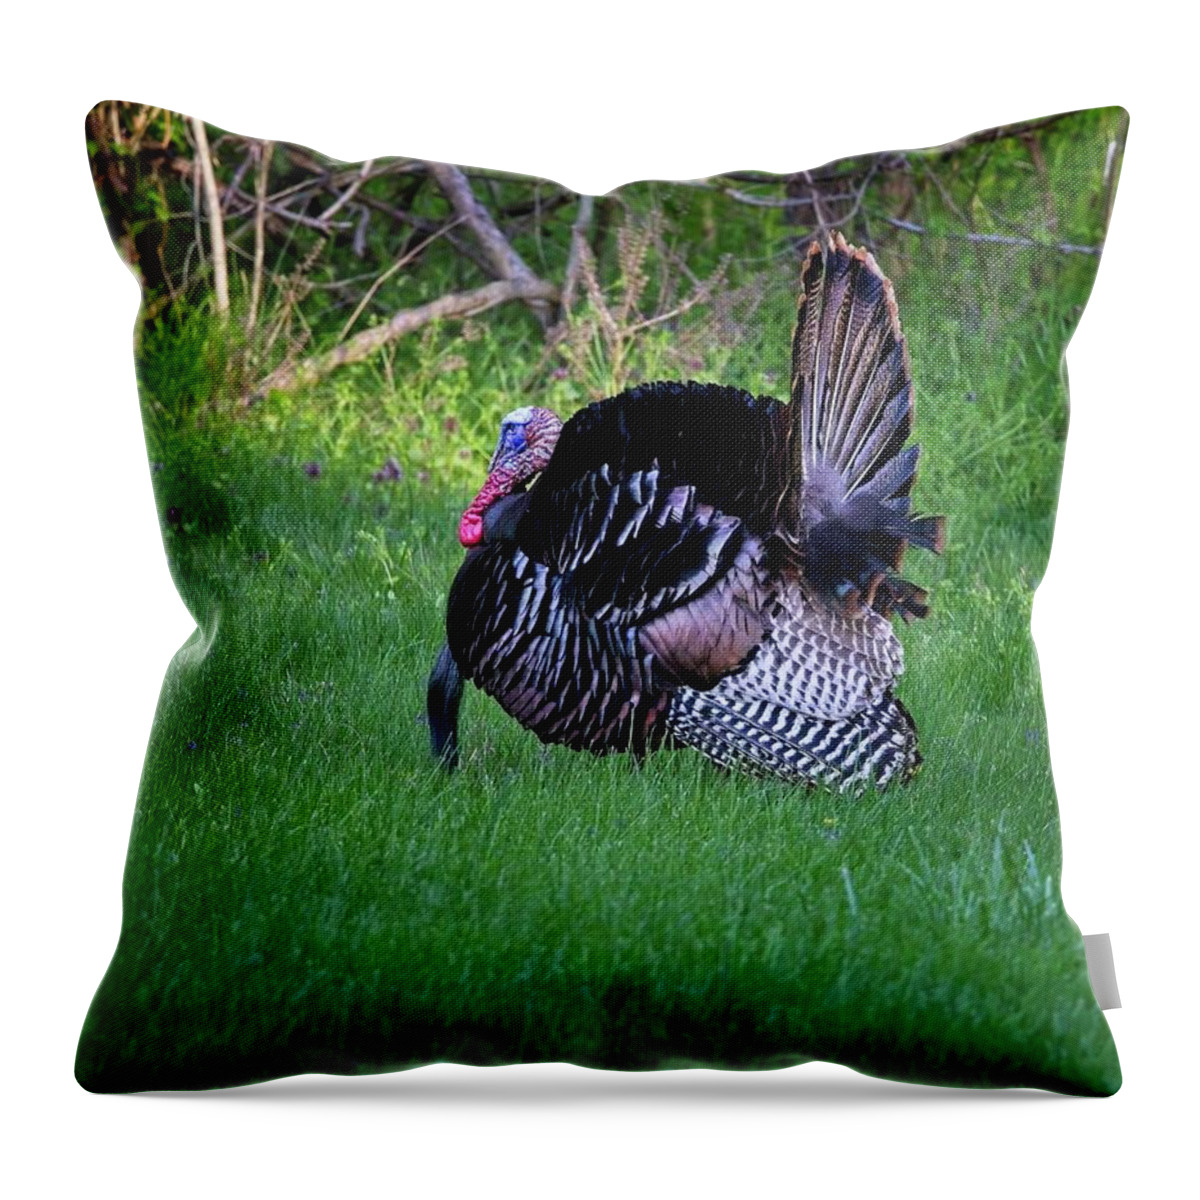 Wildlife Throw Pillow featuring the photograph Wild Turkey Gobbler displaying during mating season by Ronald Lutz